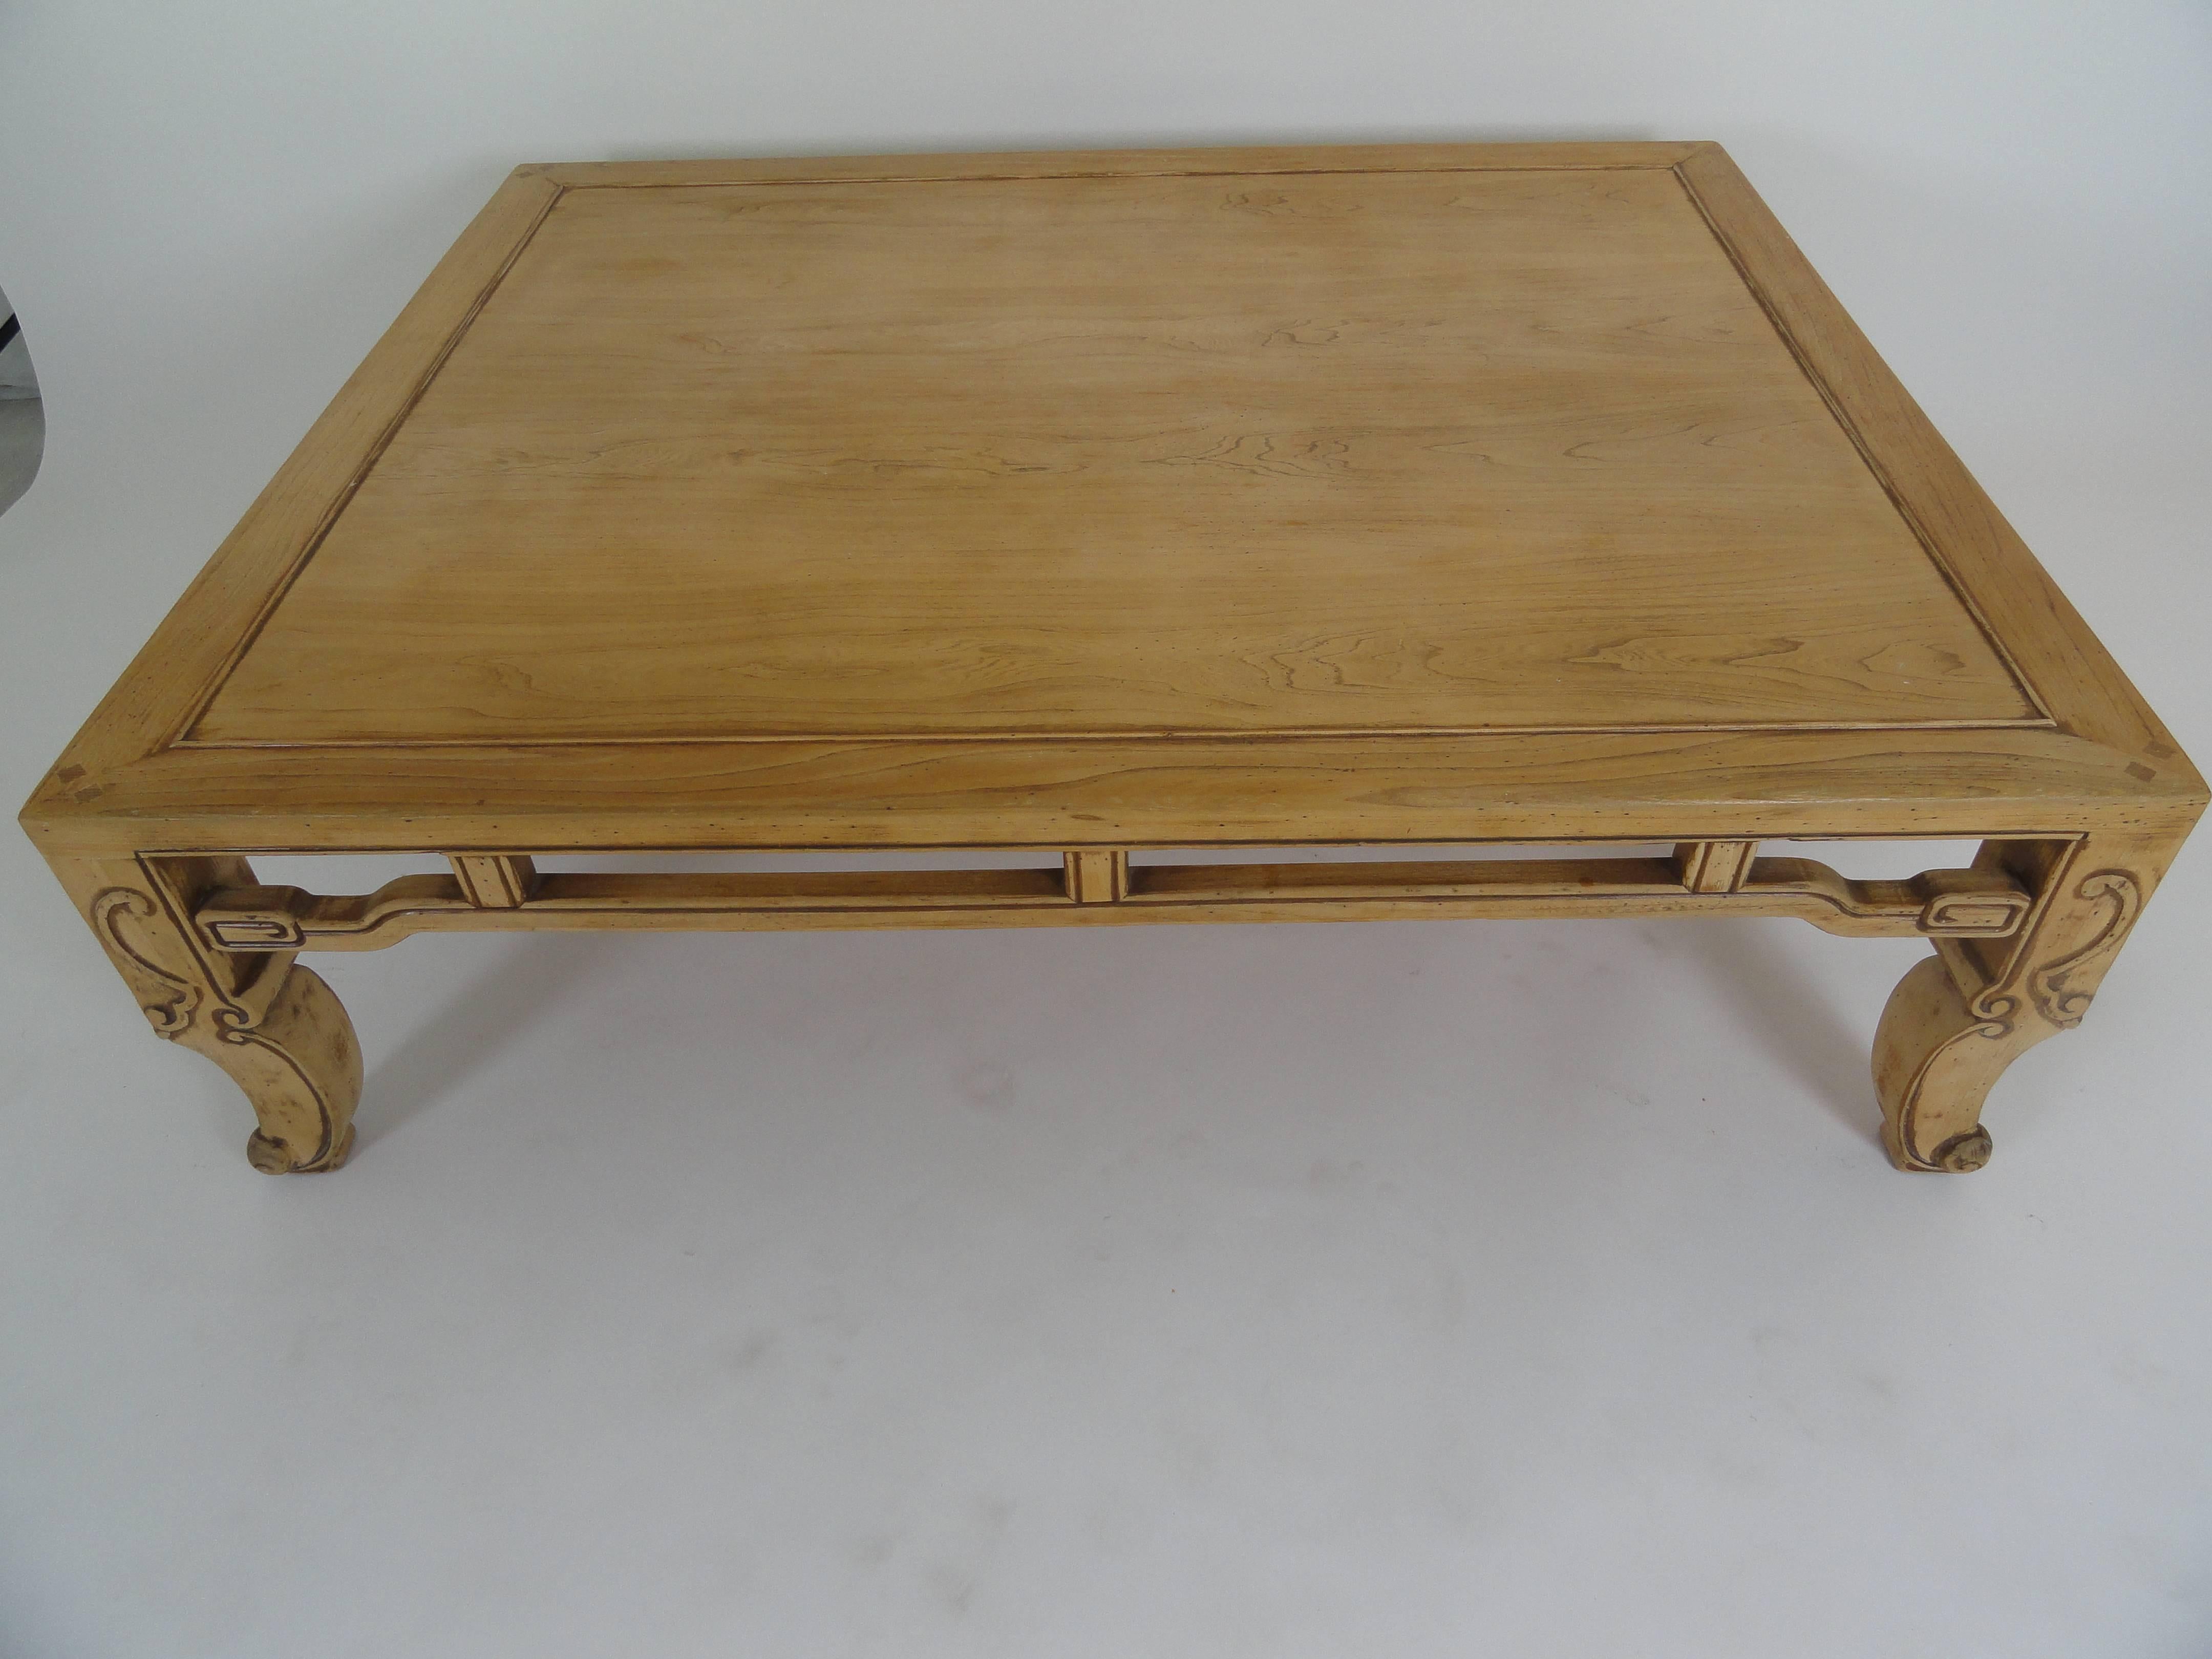 Baker Ming style coffee table in natural wood finish with detailed carving. 
Baker tag on bottom.